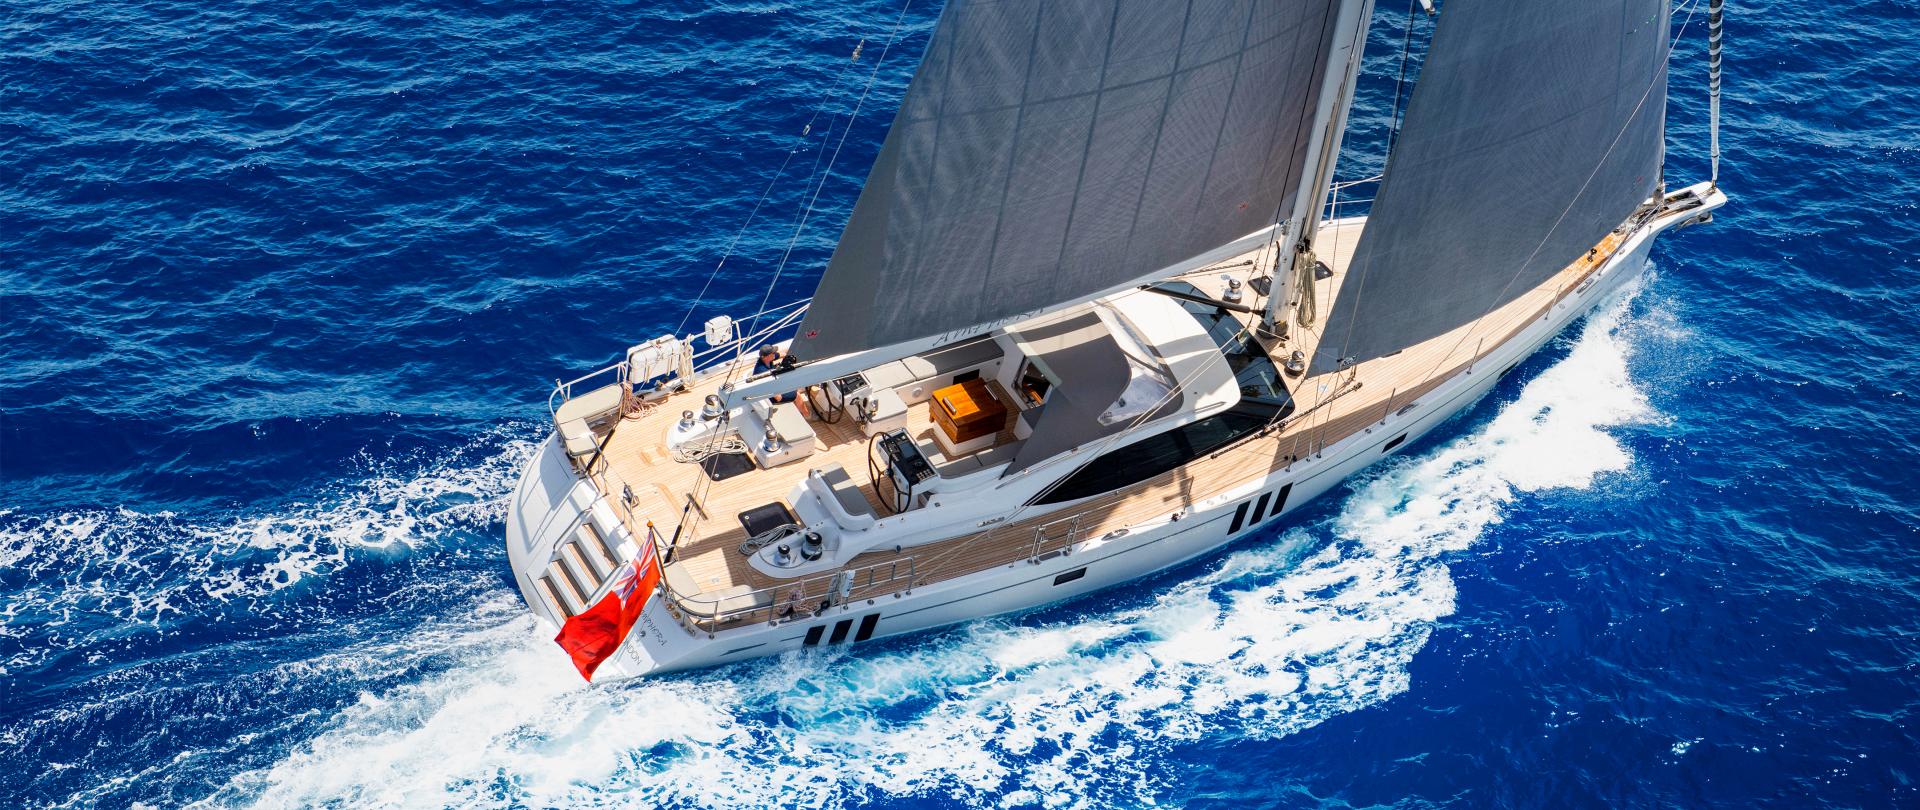 70 Foot Yacht Oyster 675 Ocean Sailboat Oyster Yachts